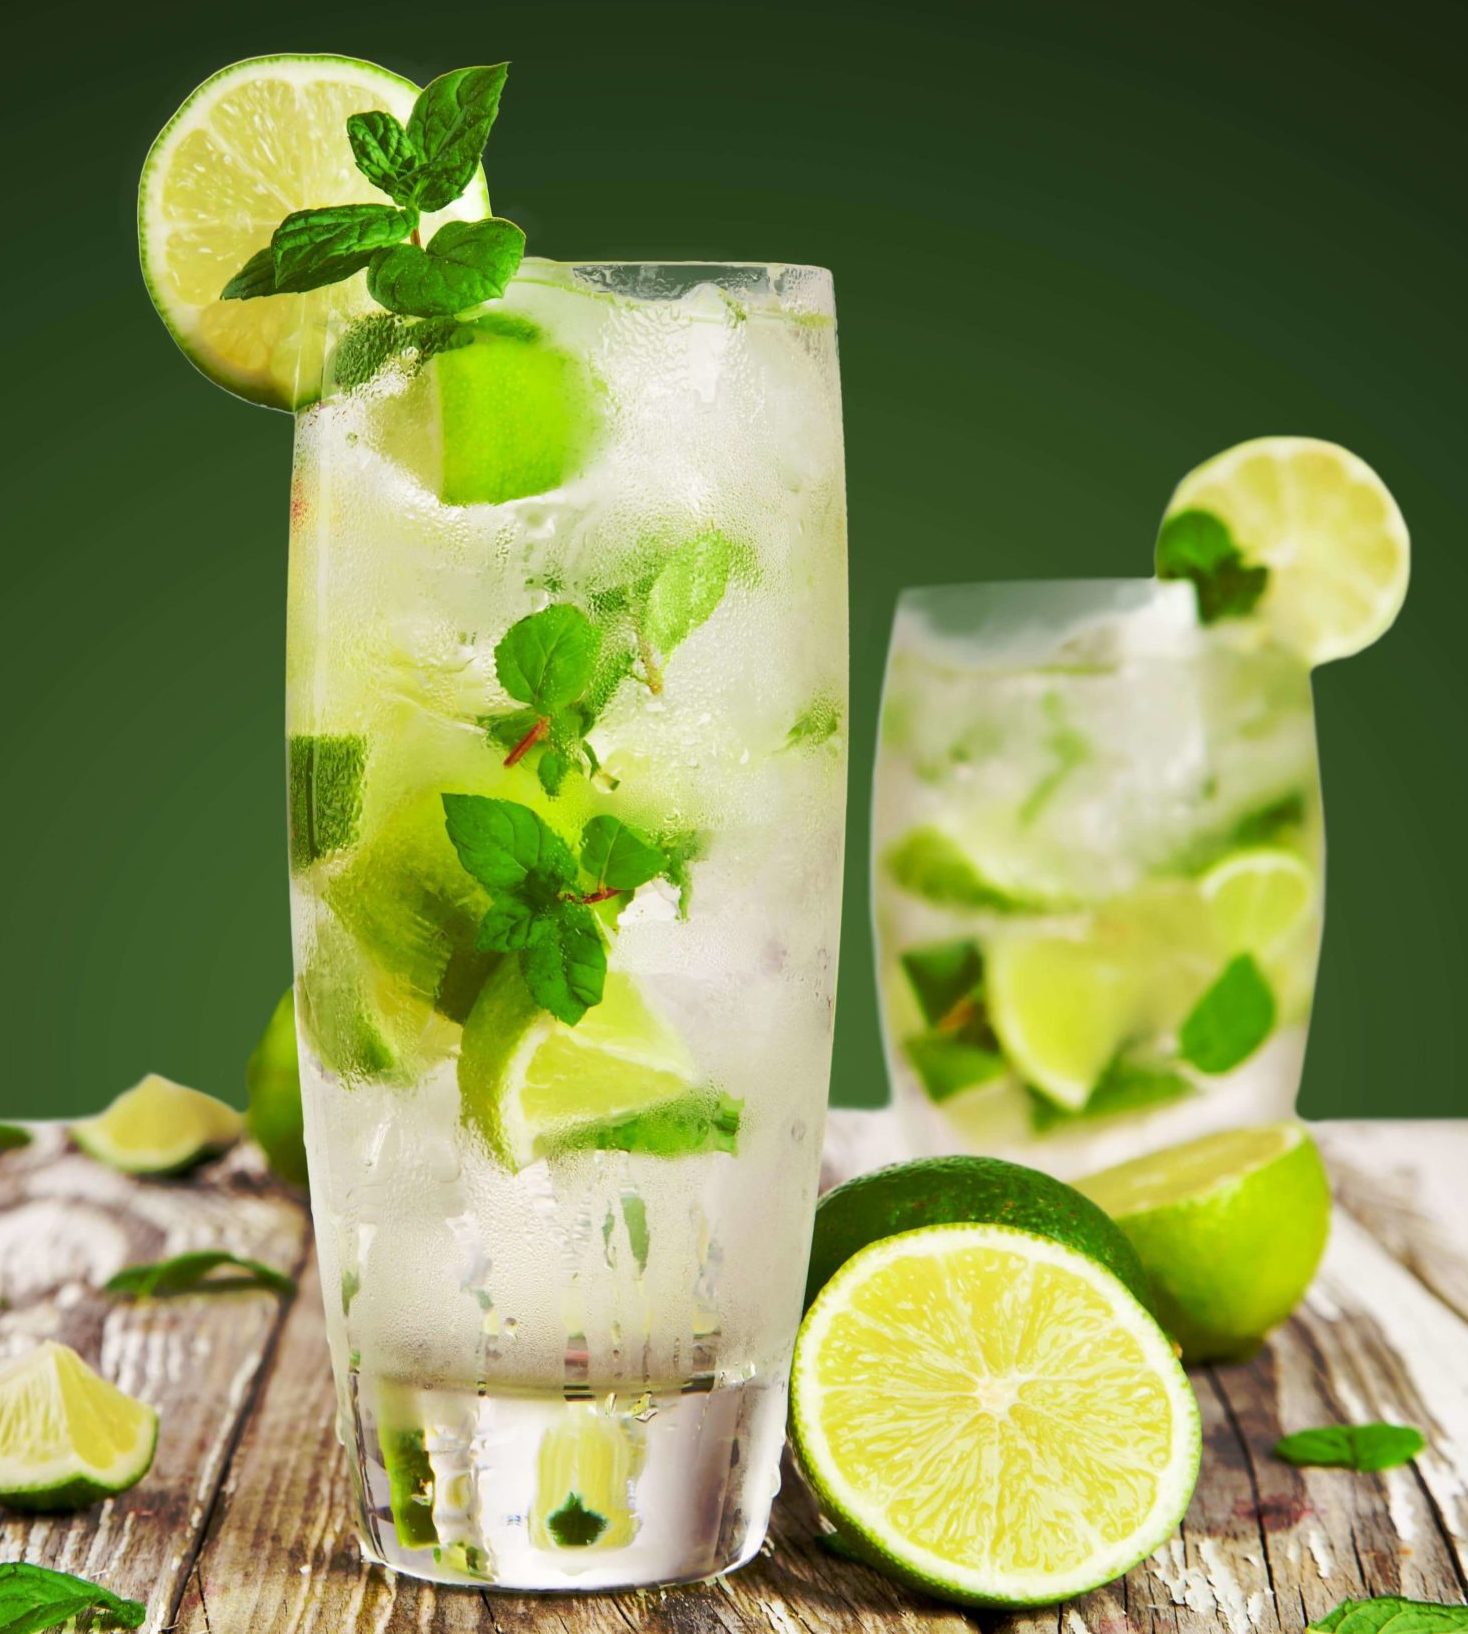 Virgin Mojito Recipe Step By Step Instructions